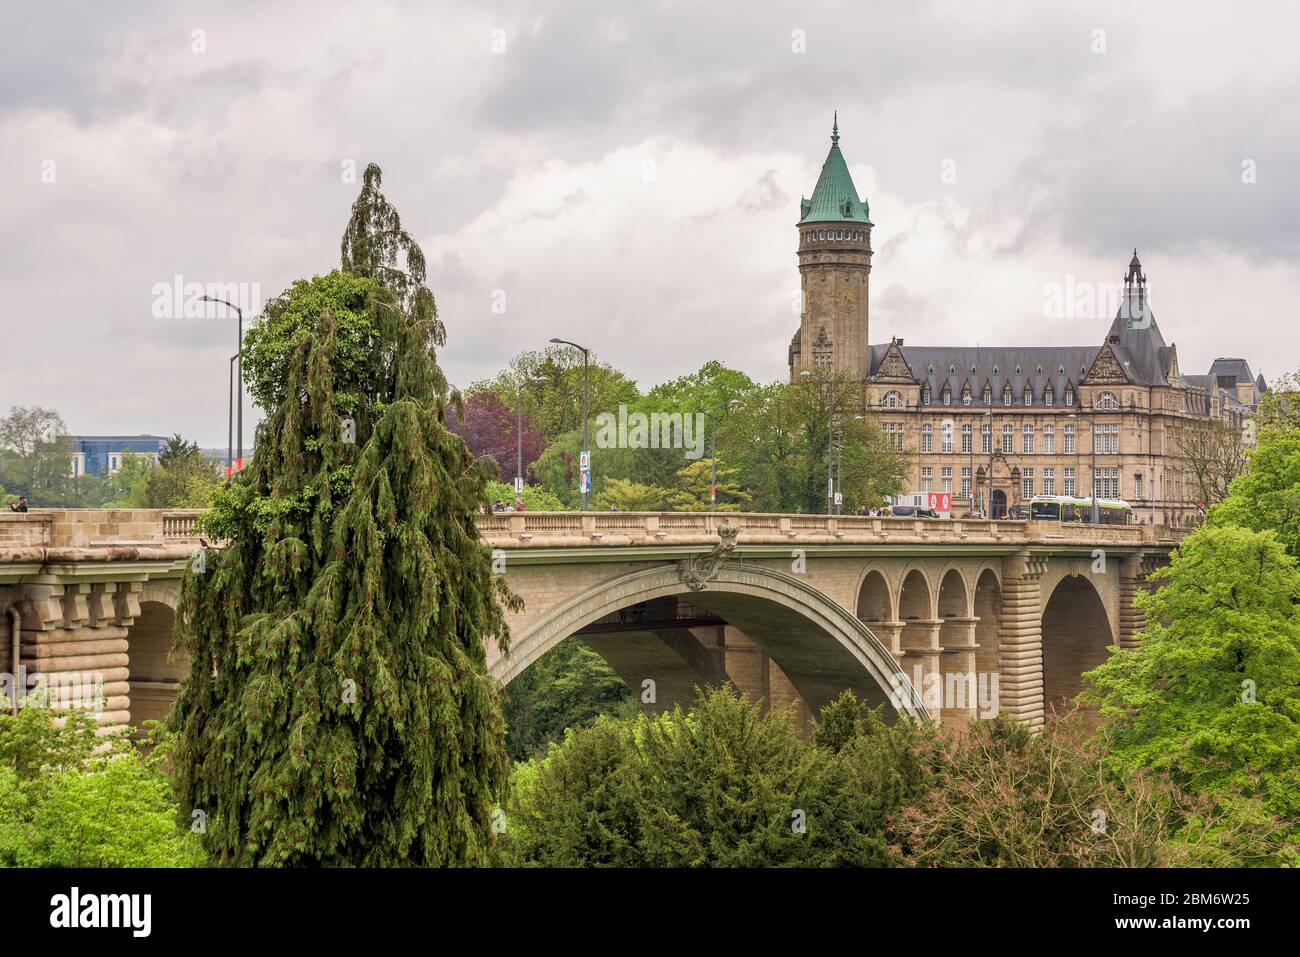 Adolphe bridge, double decked bridge for cars pedestrians and cycles above the Parcs de la Pétrusse, from old town to station district. Luxembourg. Stock Photo